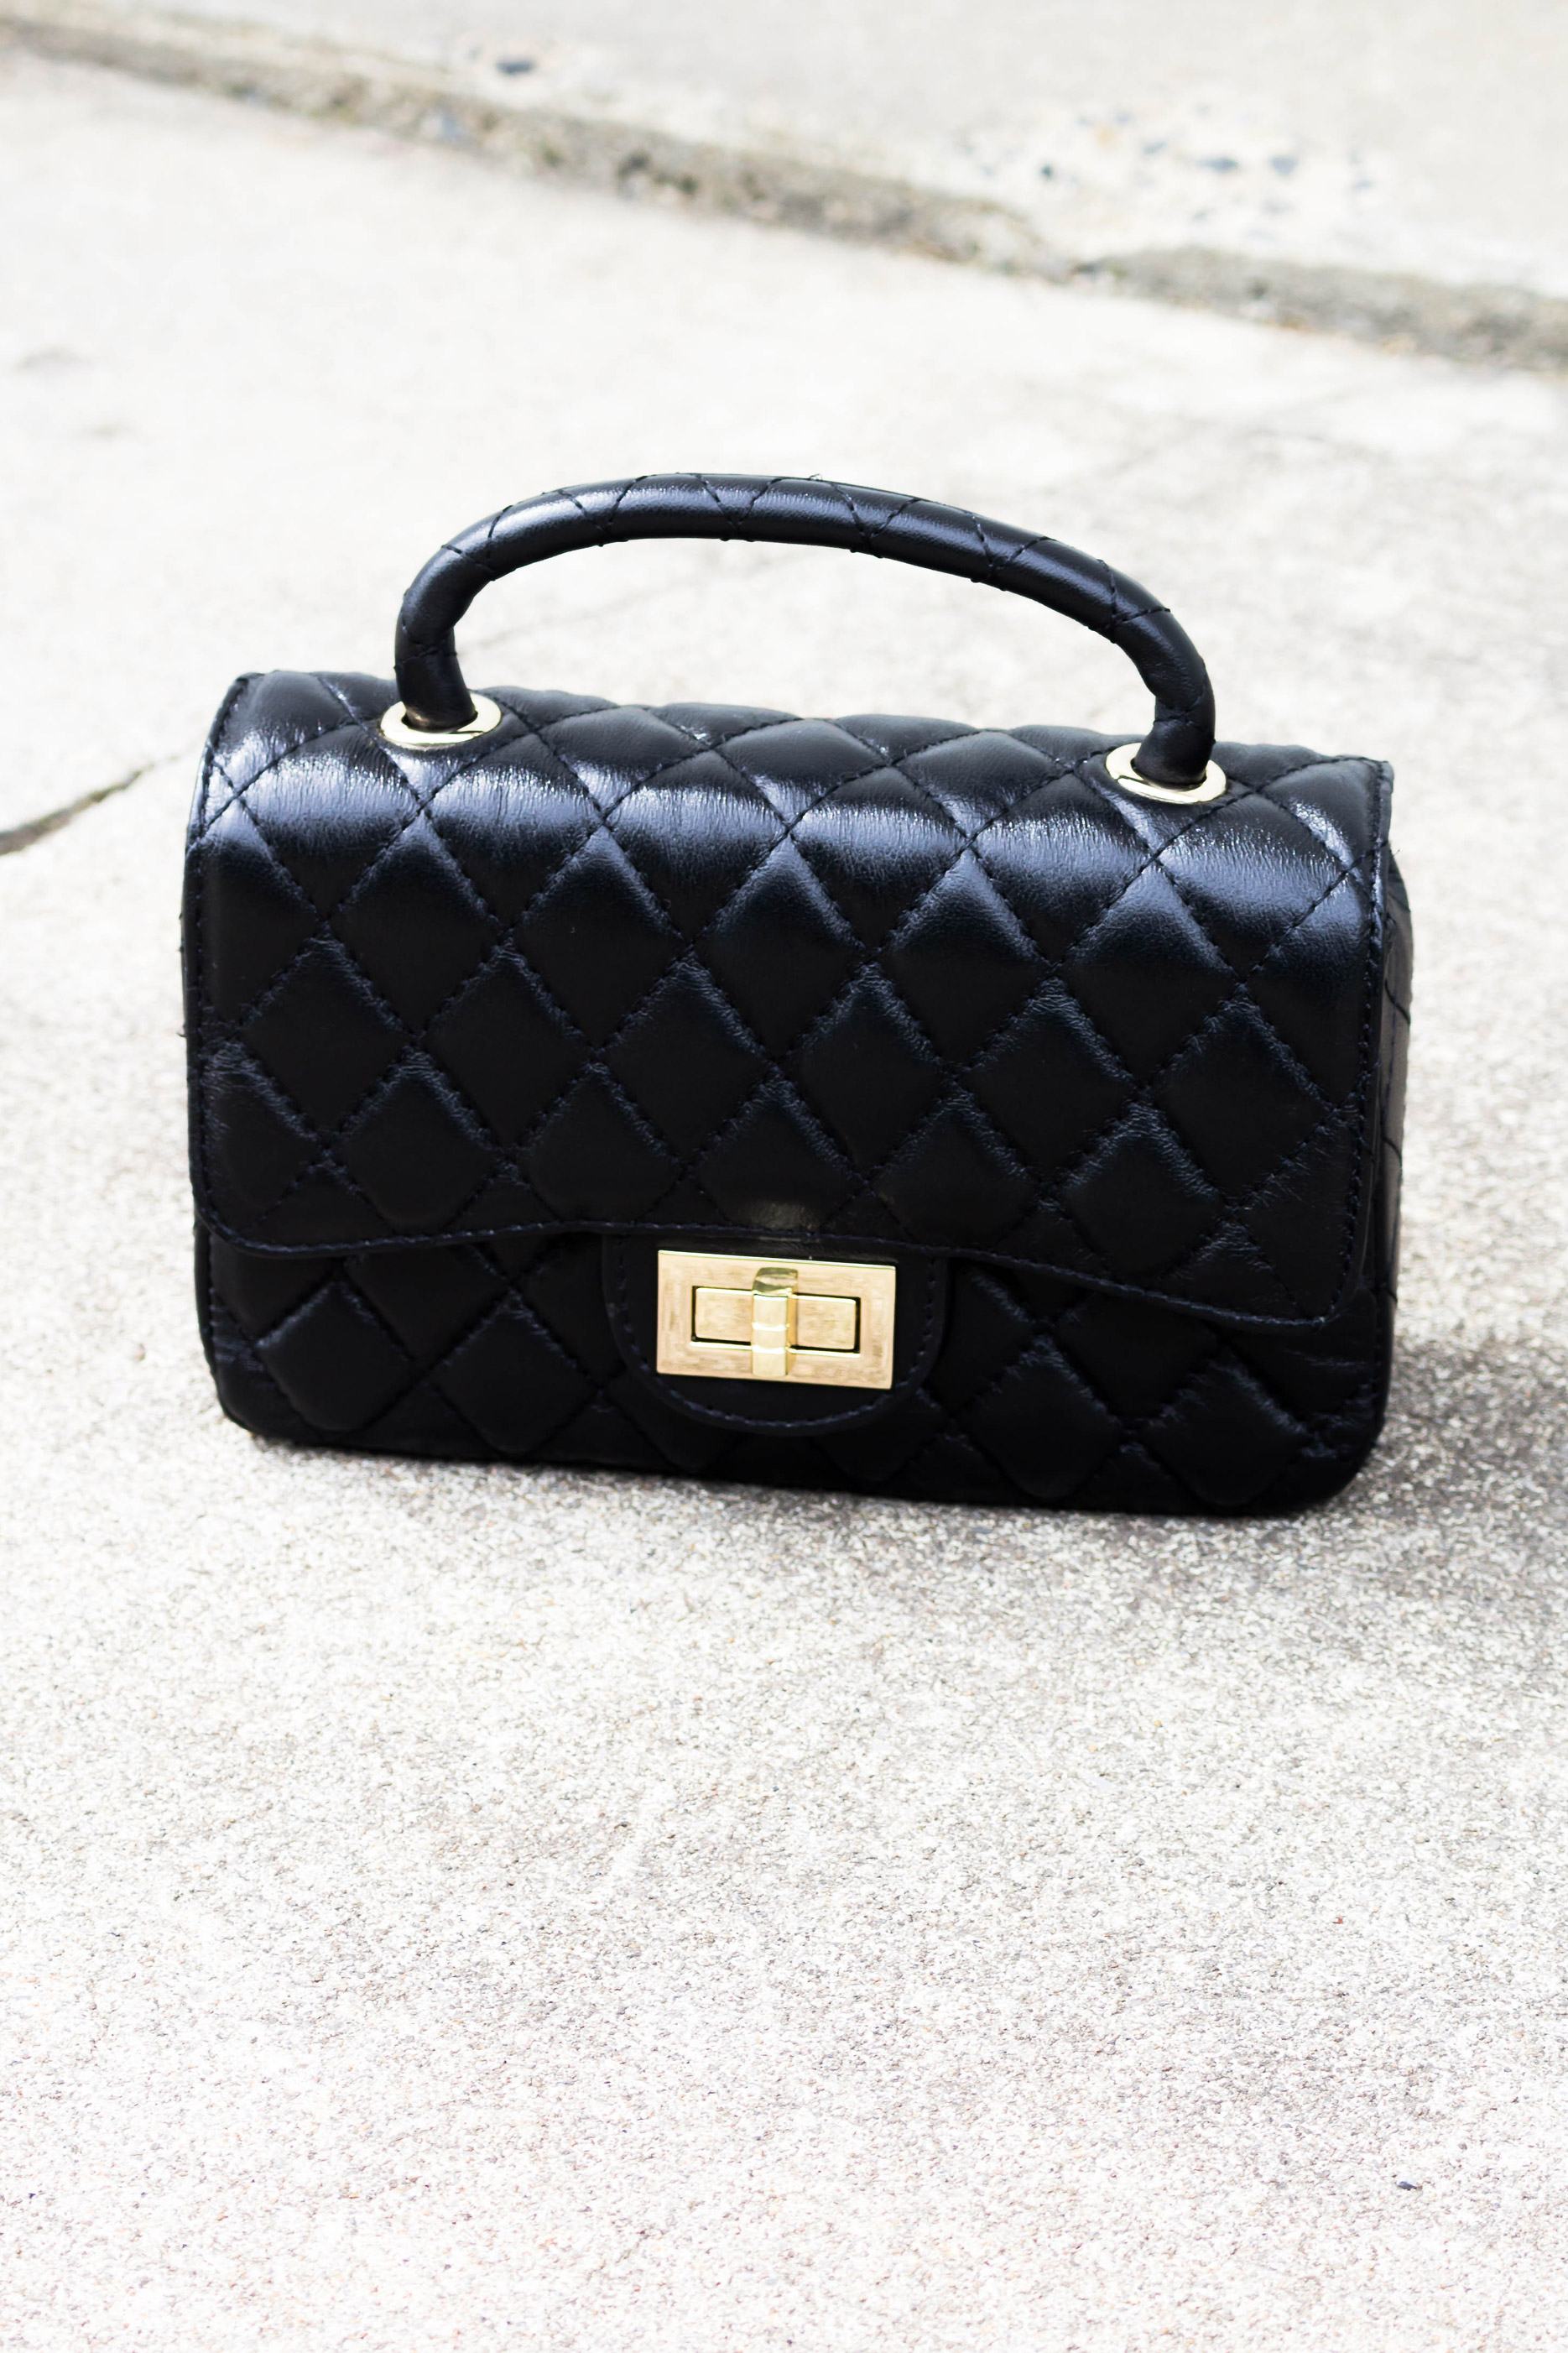 The Best $25 Chanel Bag Dupe